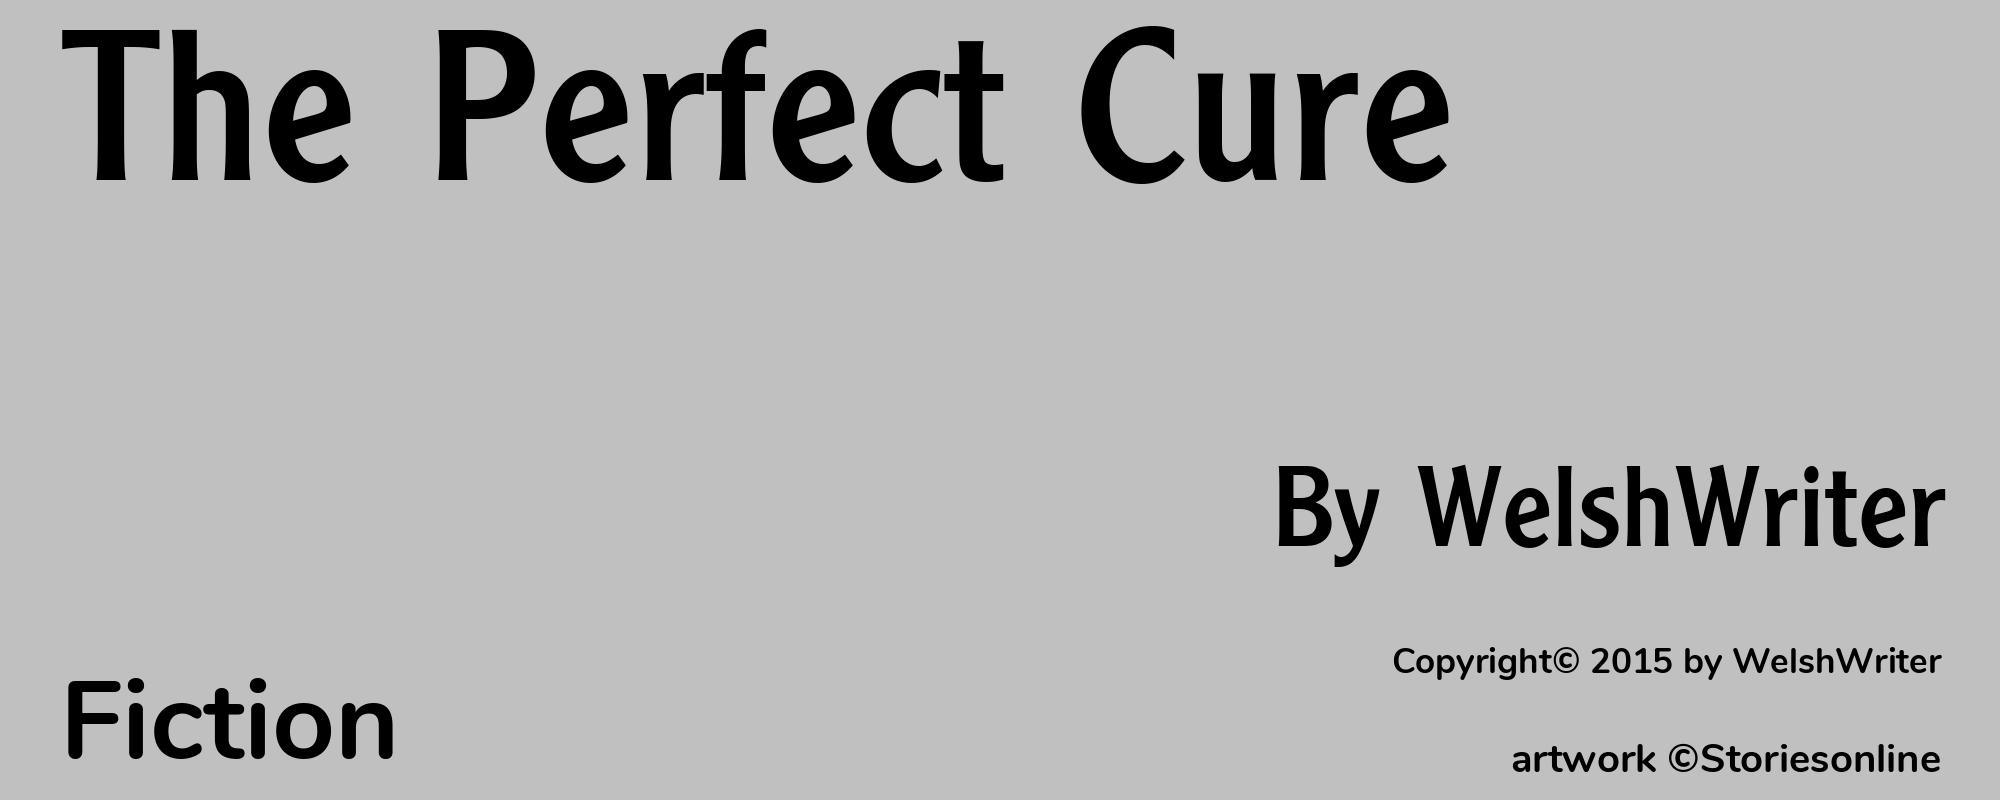 The Perfect Cure - Cover